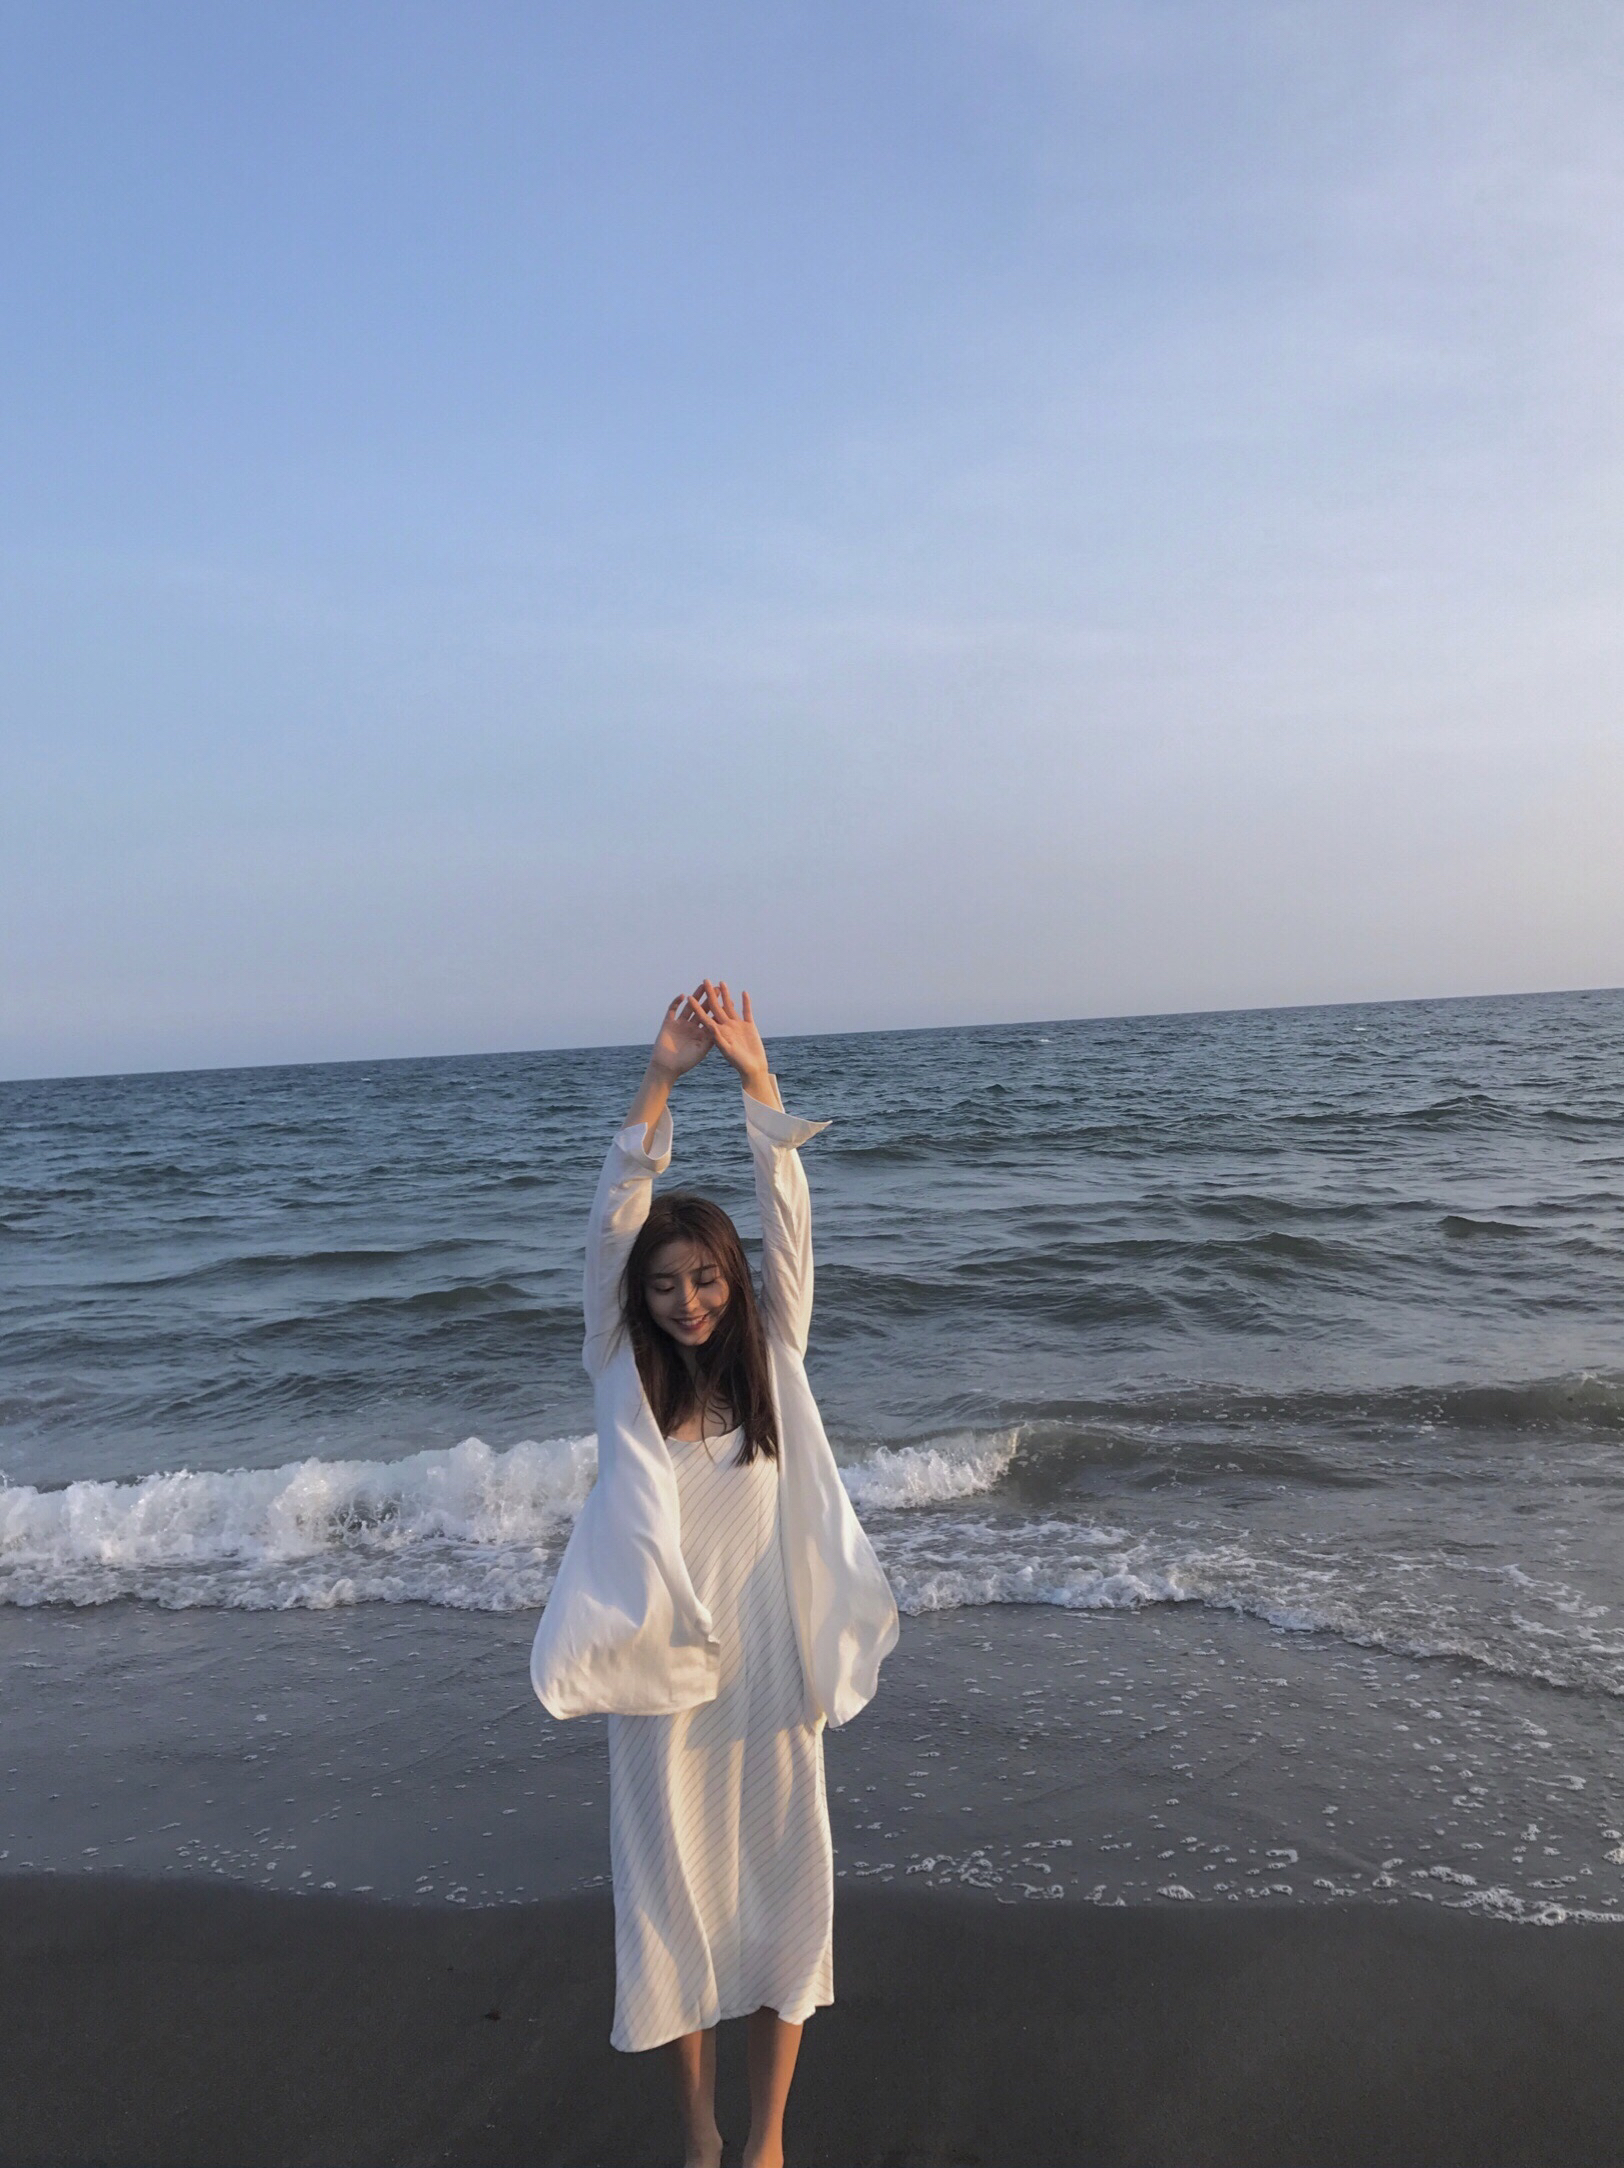 People 1624x2168 Chinese Duebass beach women outdoors arms up white clothing sea black hair long hair closed eyes smiling standing women model brunette Asian